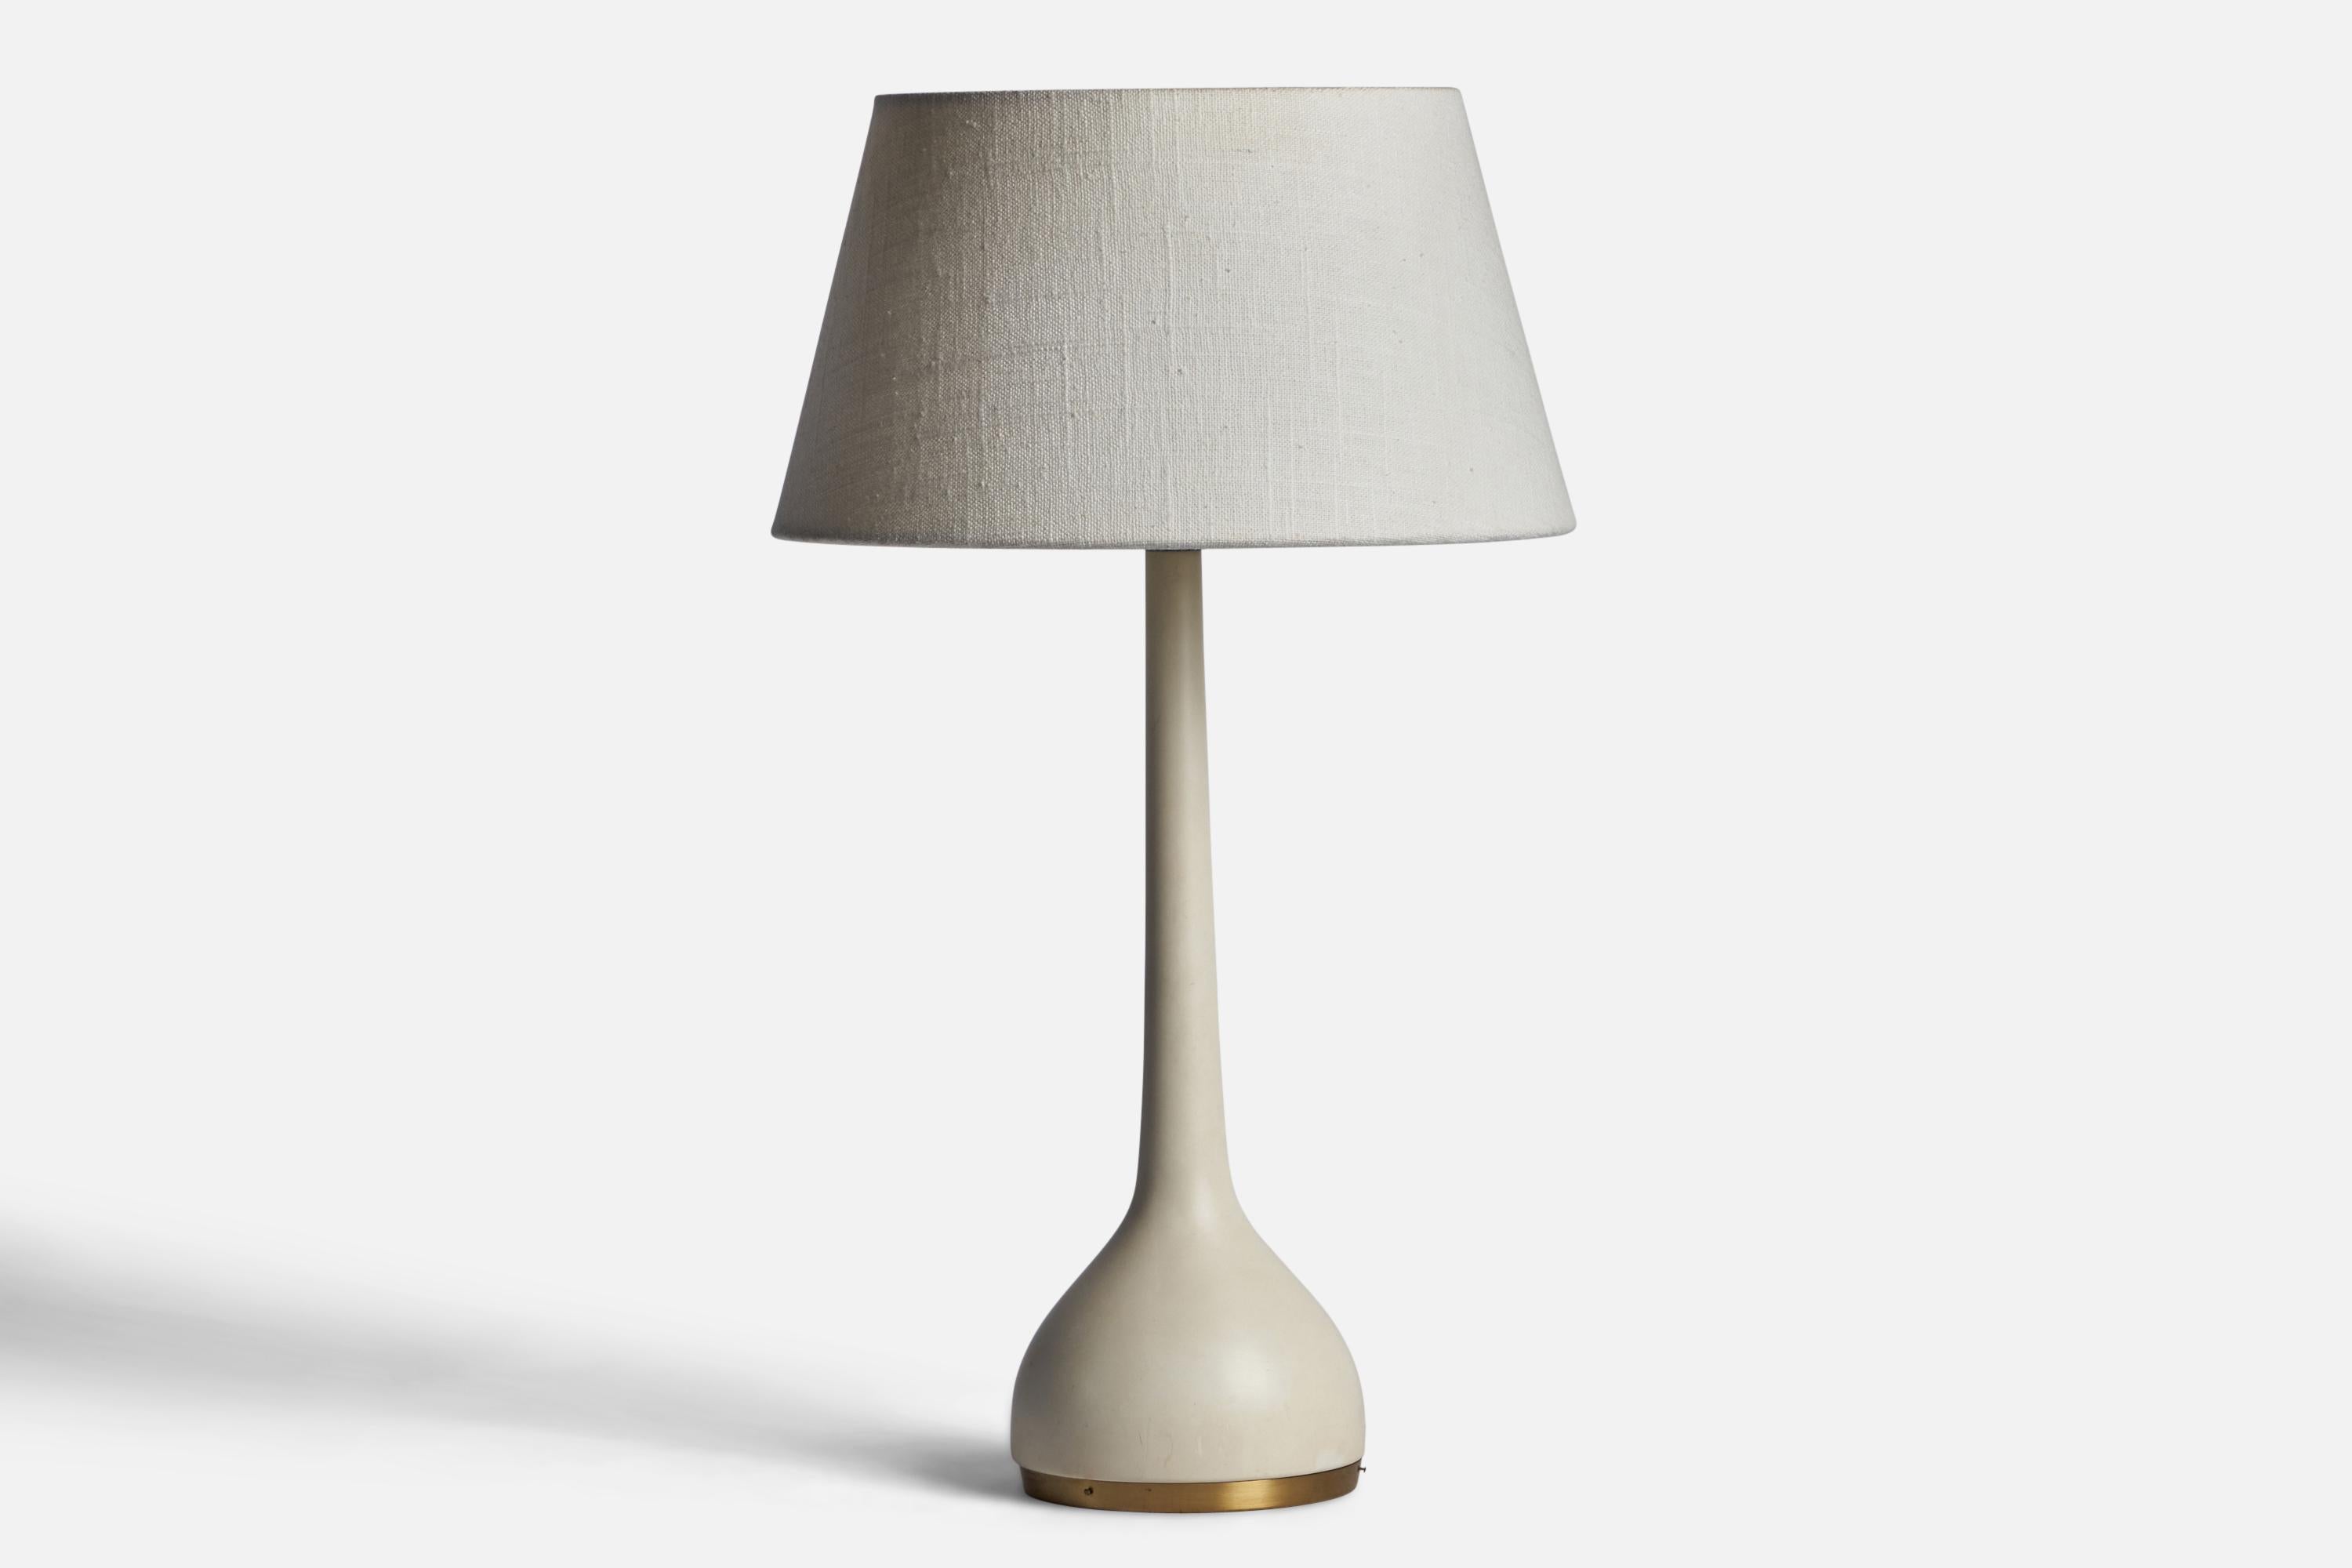 A white-lacquered wood and brass table lamp designed and produced by Hans-Agne Jakobsson, Markaryd, Sweden, 1960s.

Dimensions of Lamp (inches): 14” H x 4.45” Diameter
Dimensions of Shade (inches): 7” Top Diameter x 10” Bottom Diameter x 5.5” H